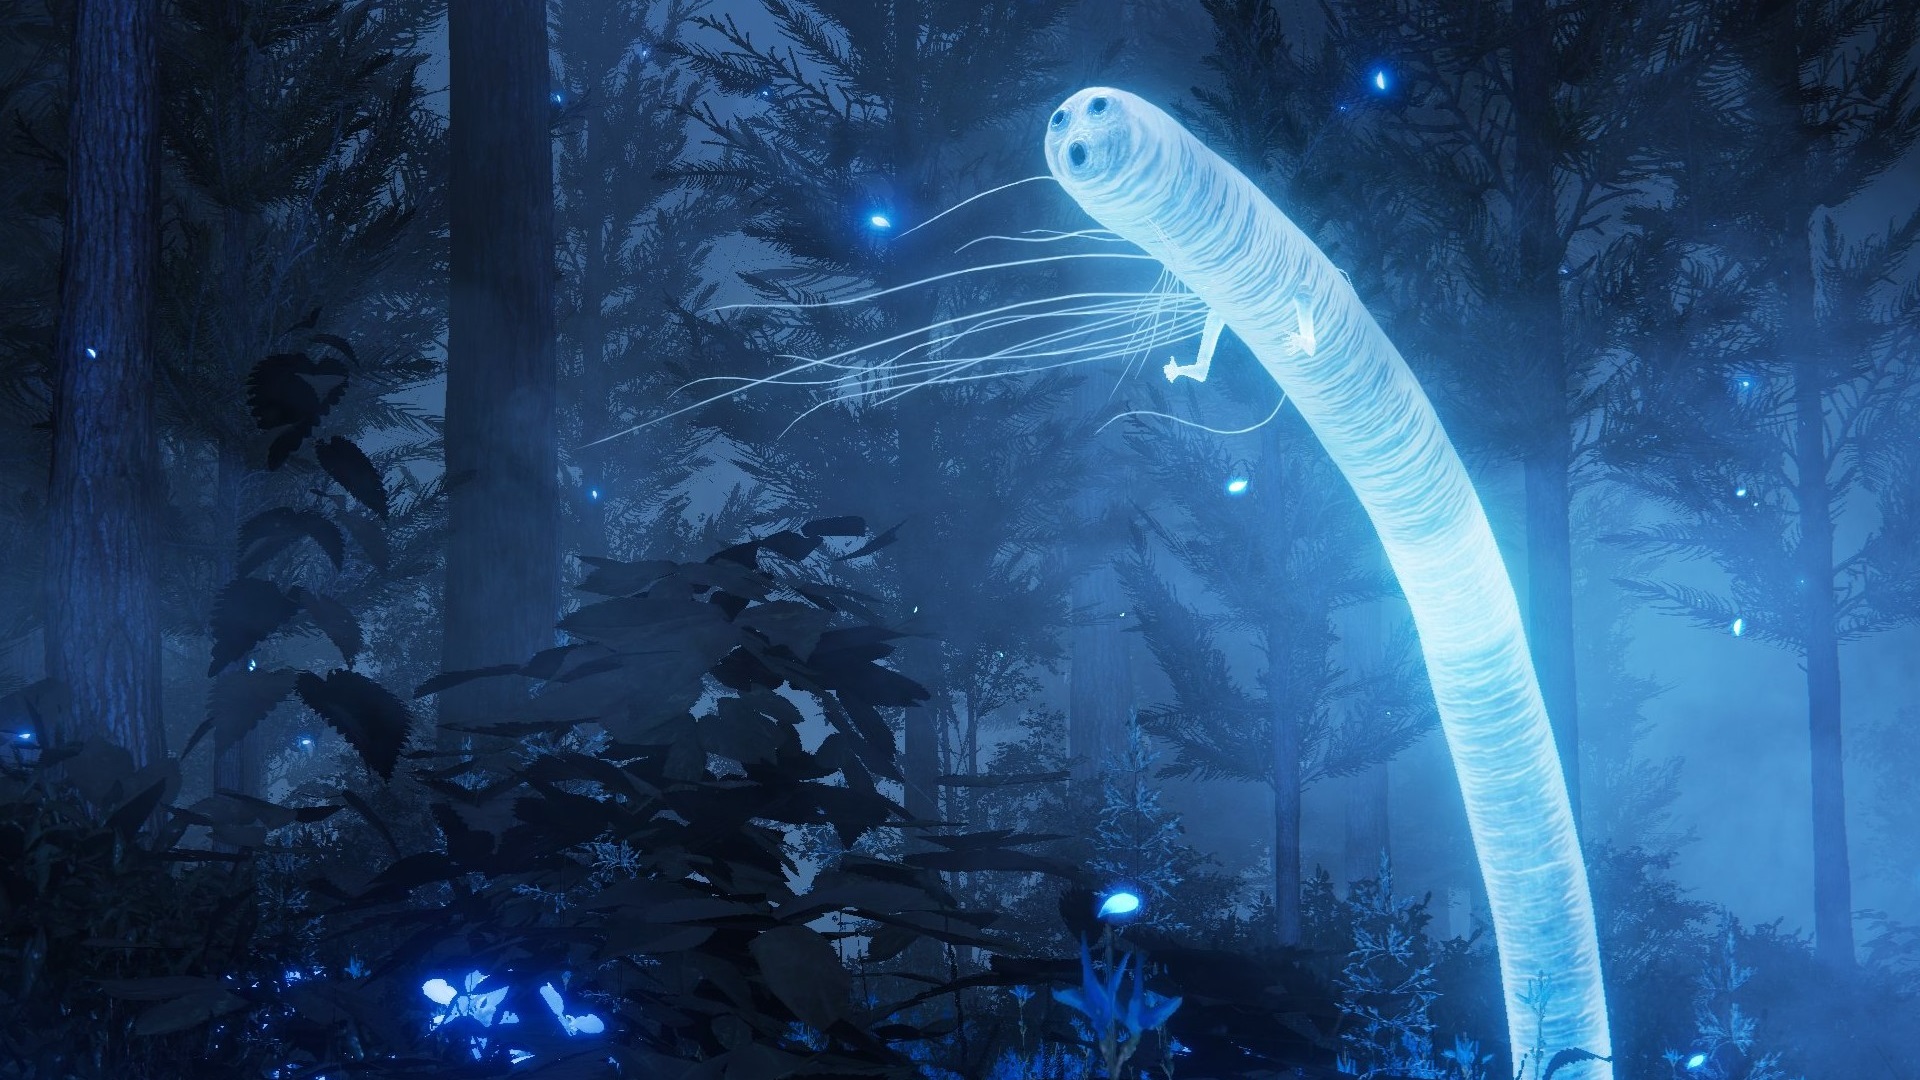 Everybody loves the goofy glowing worm guy coming in Elden Ring’s DLC, but we’re also terrified something bad will happen to him